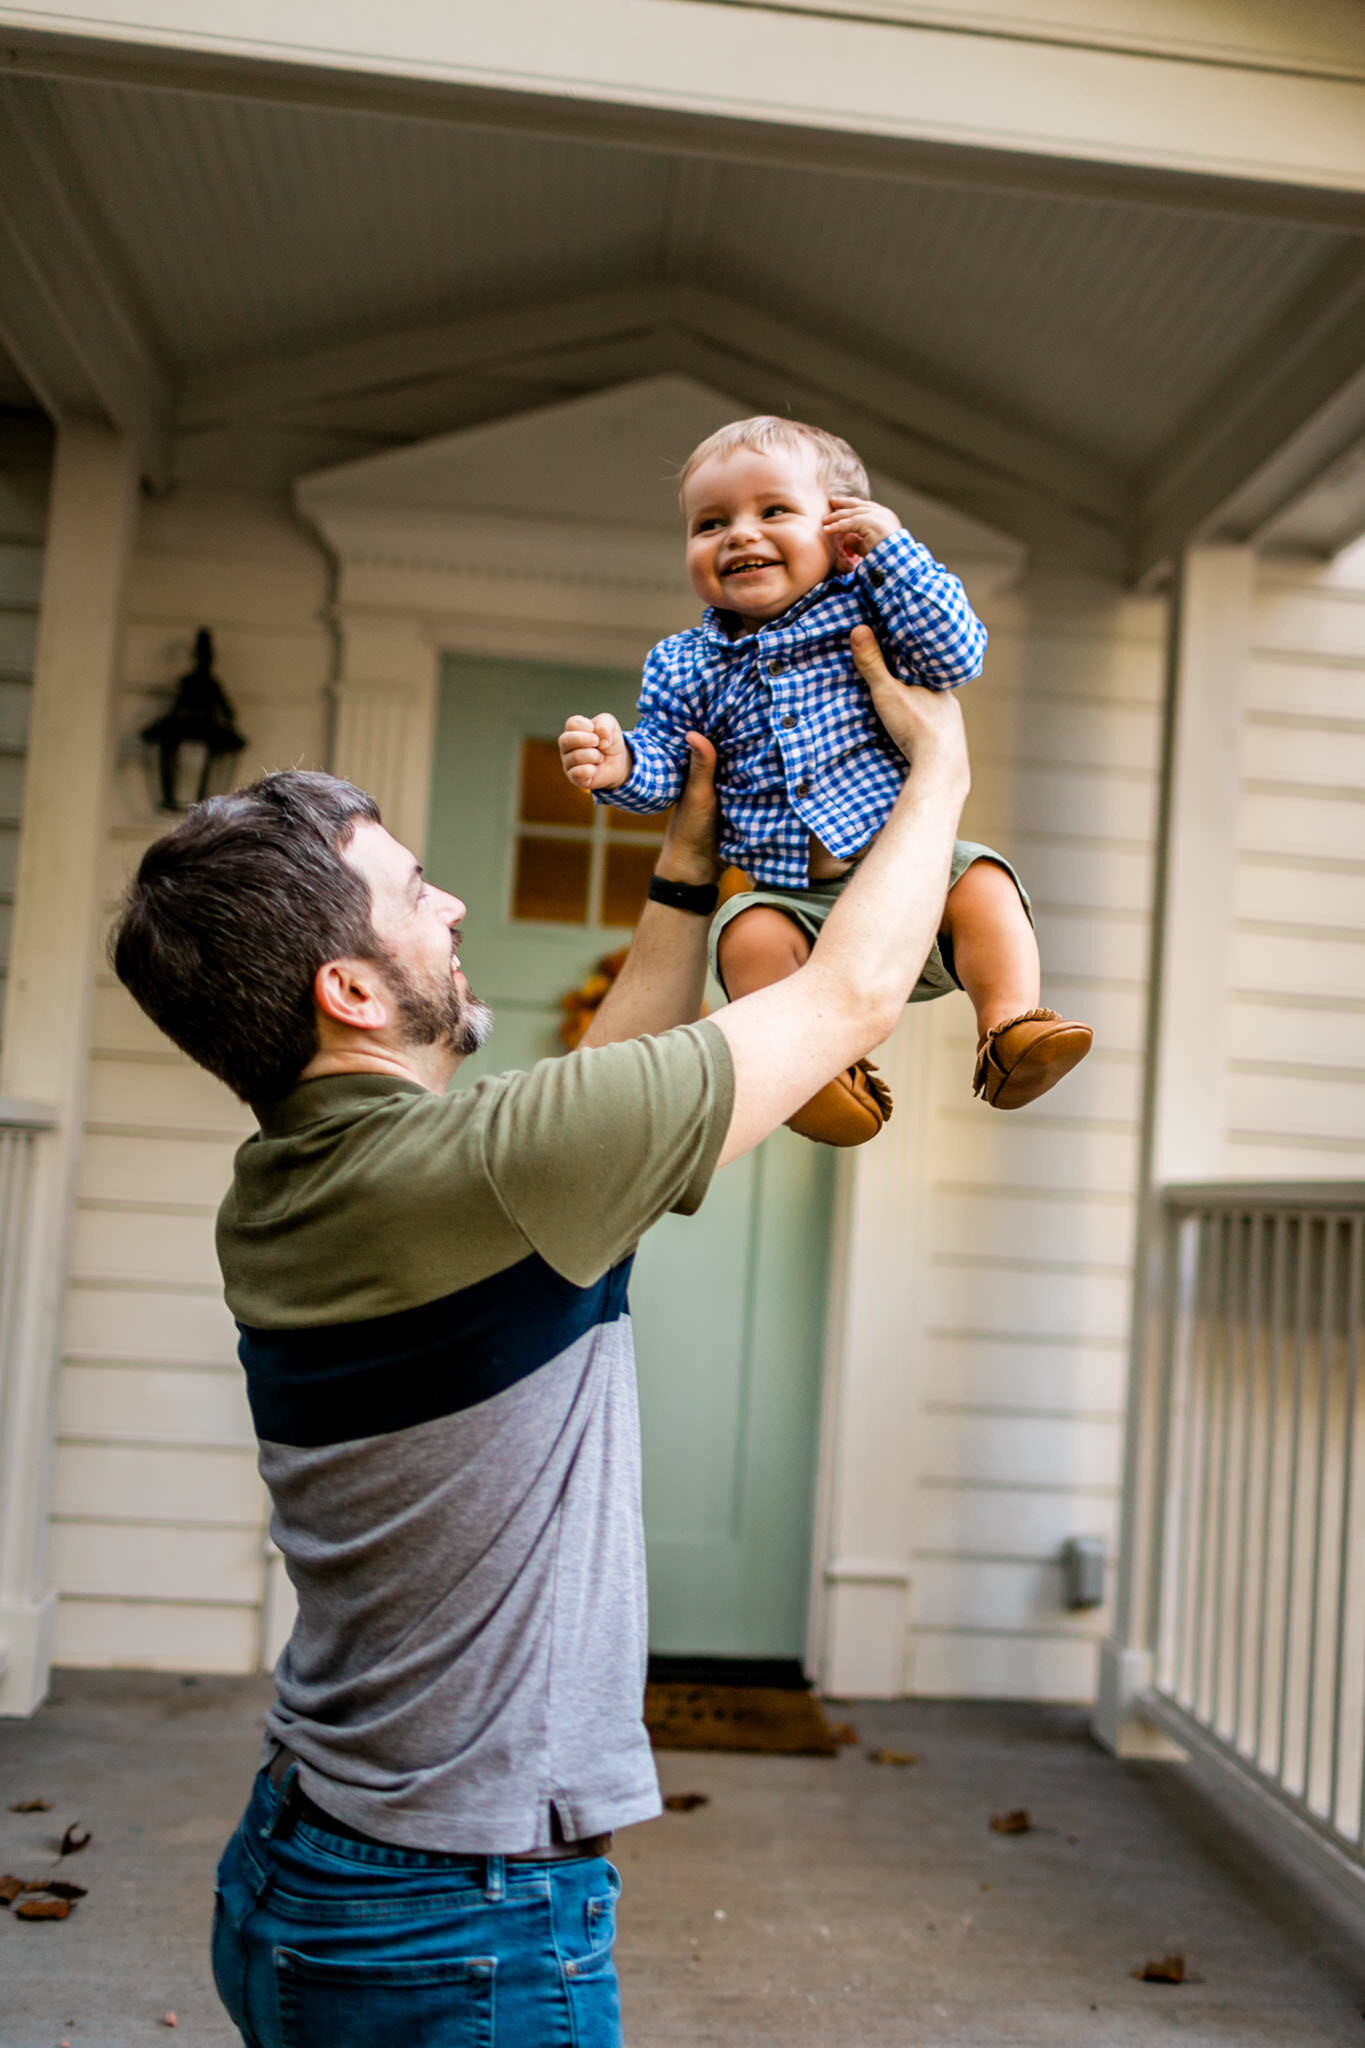 Raleigh Family Photographer | By G. Lin Photography | Dad tossing baby boy in the air